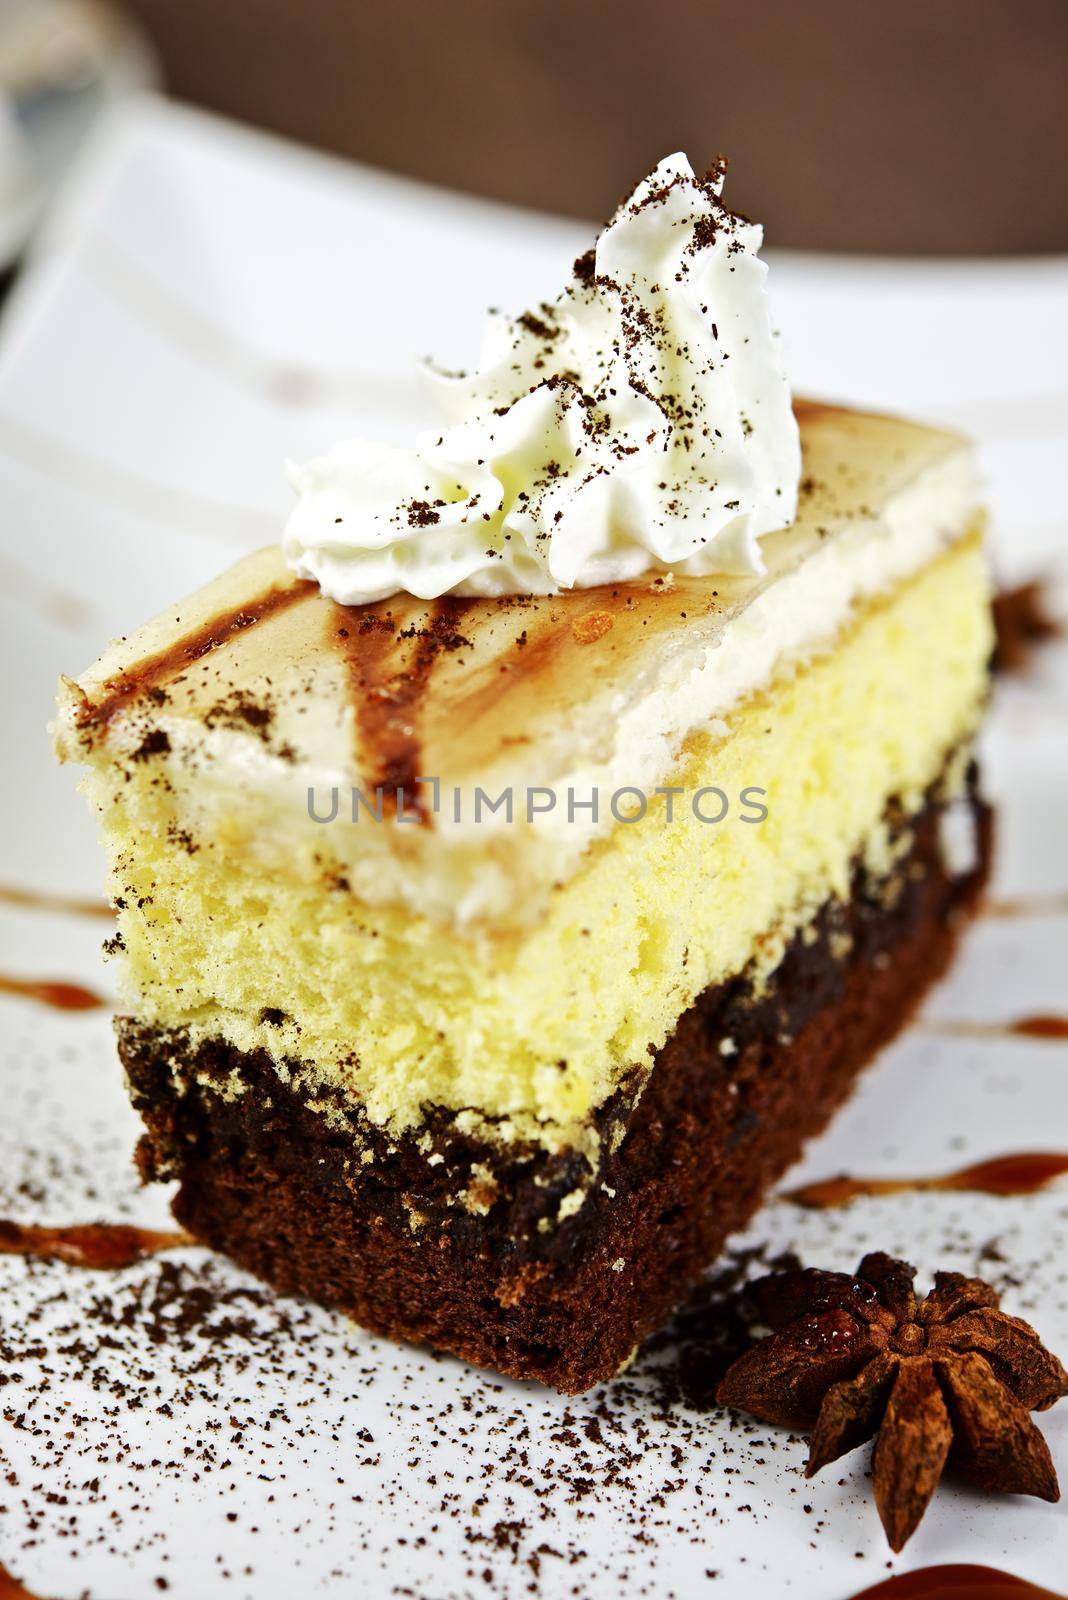 Cake Piece with Cream on Top. Delicious Cake Vertical Closeup Photography. Food Photo Collection.